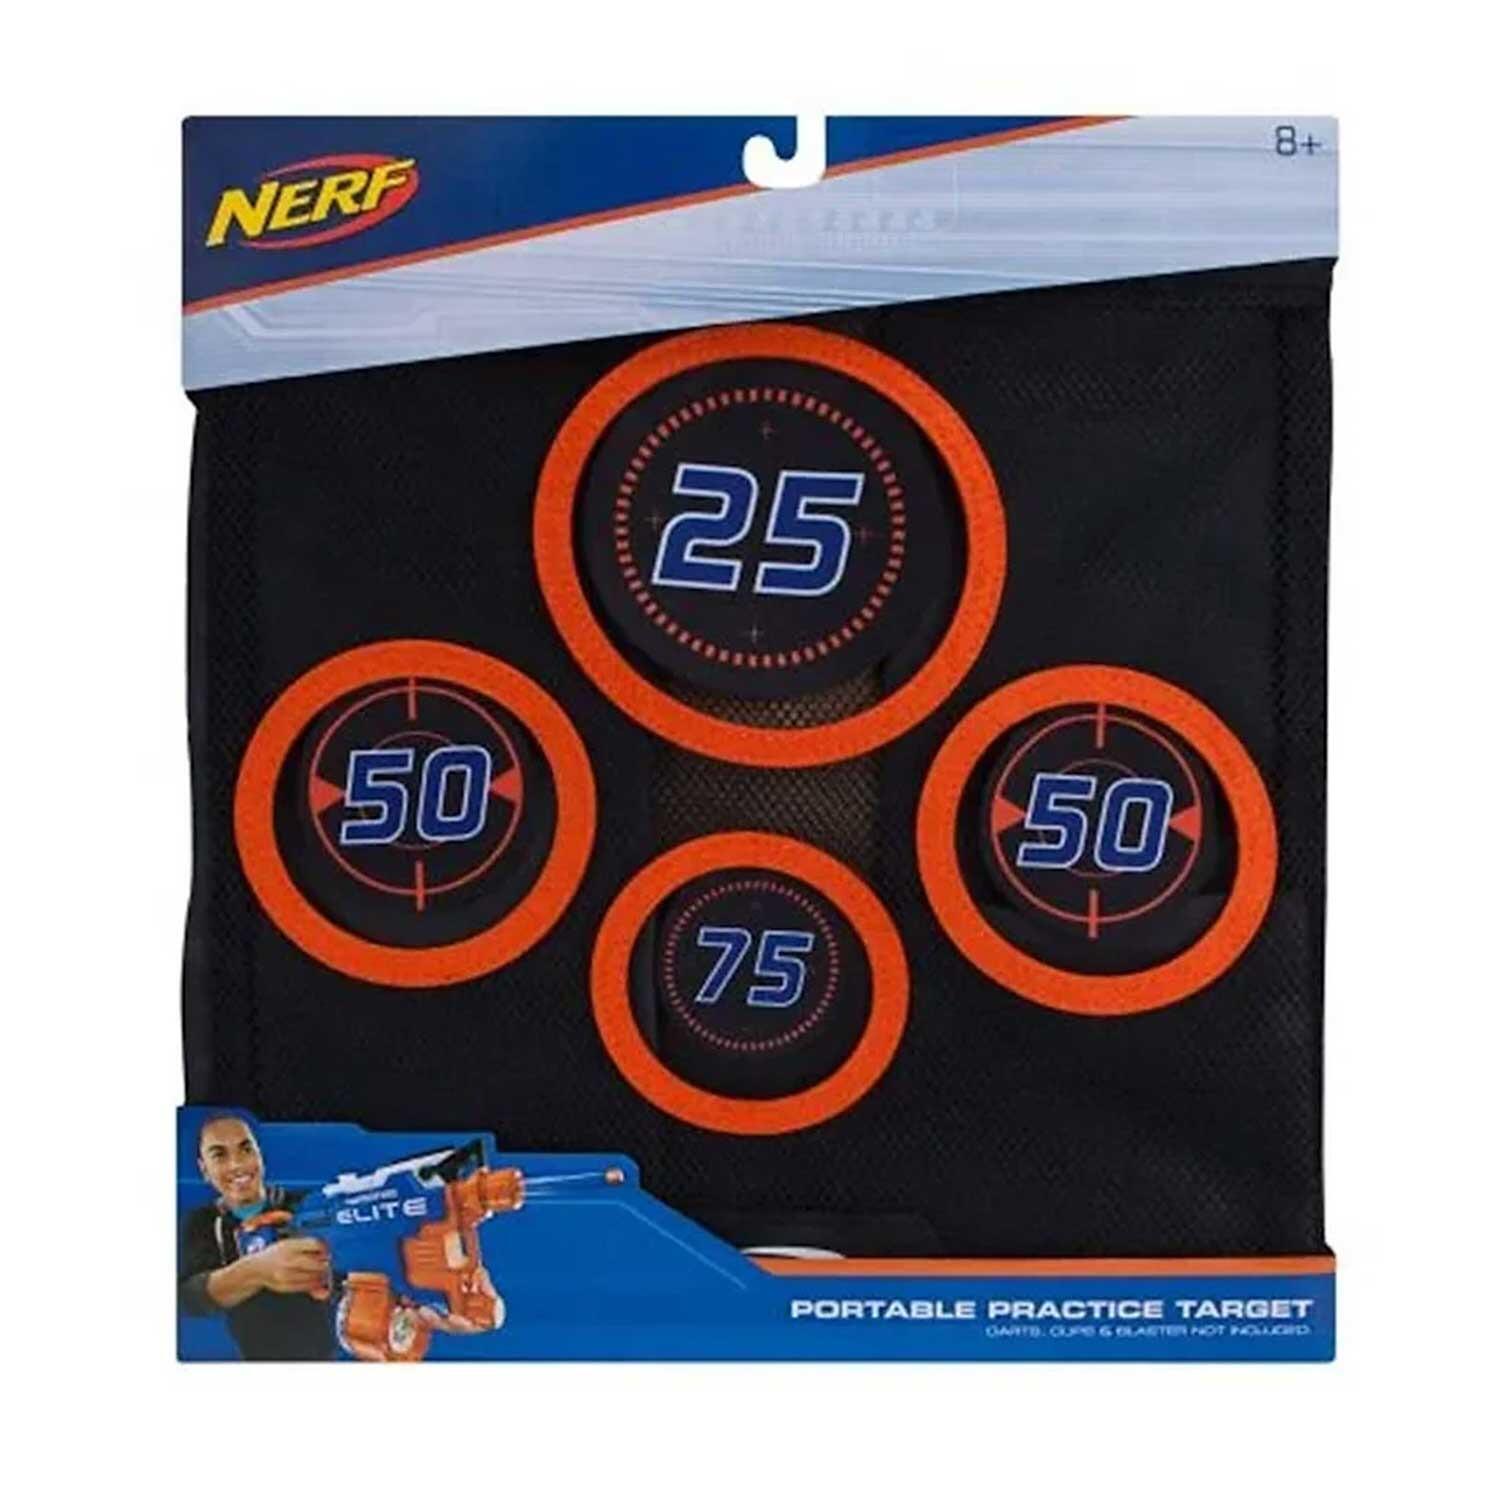 Nerf Portable Practice Target Boxed